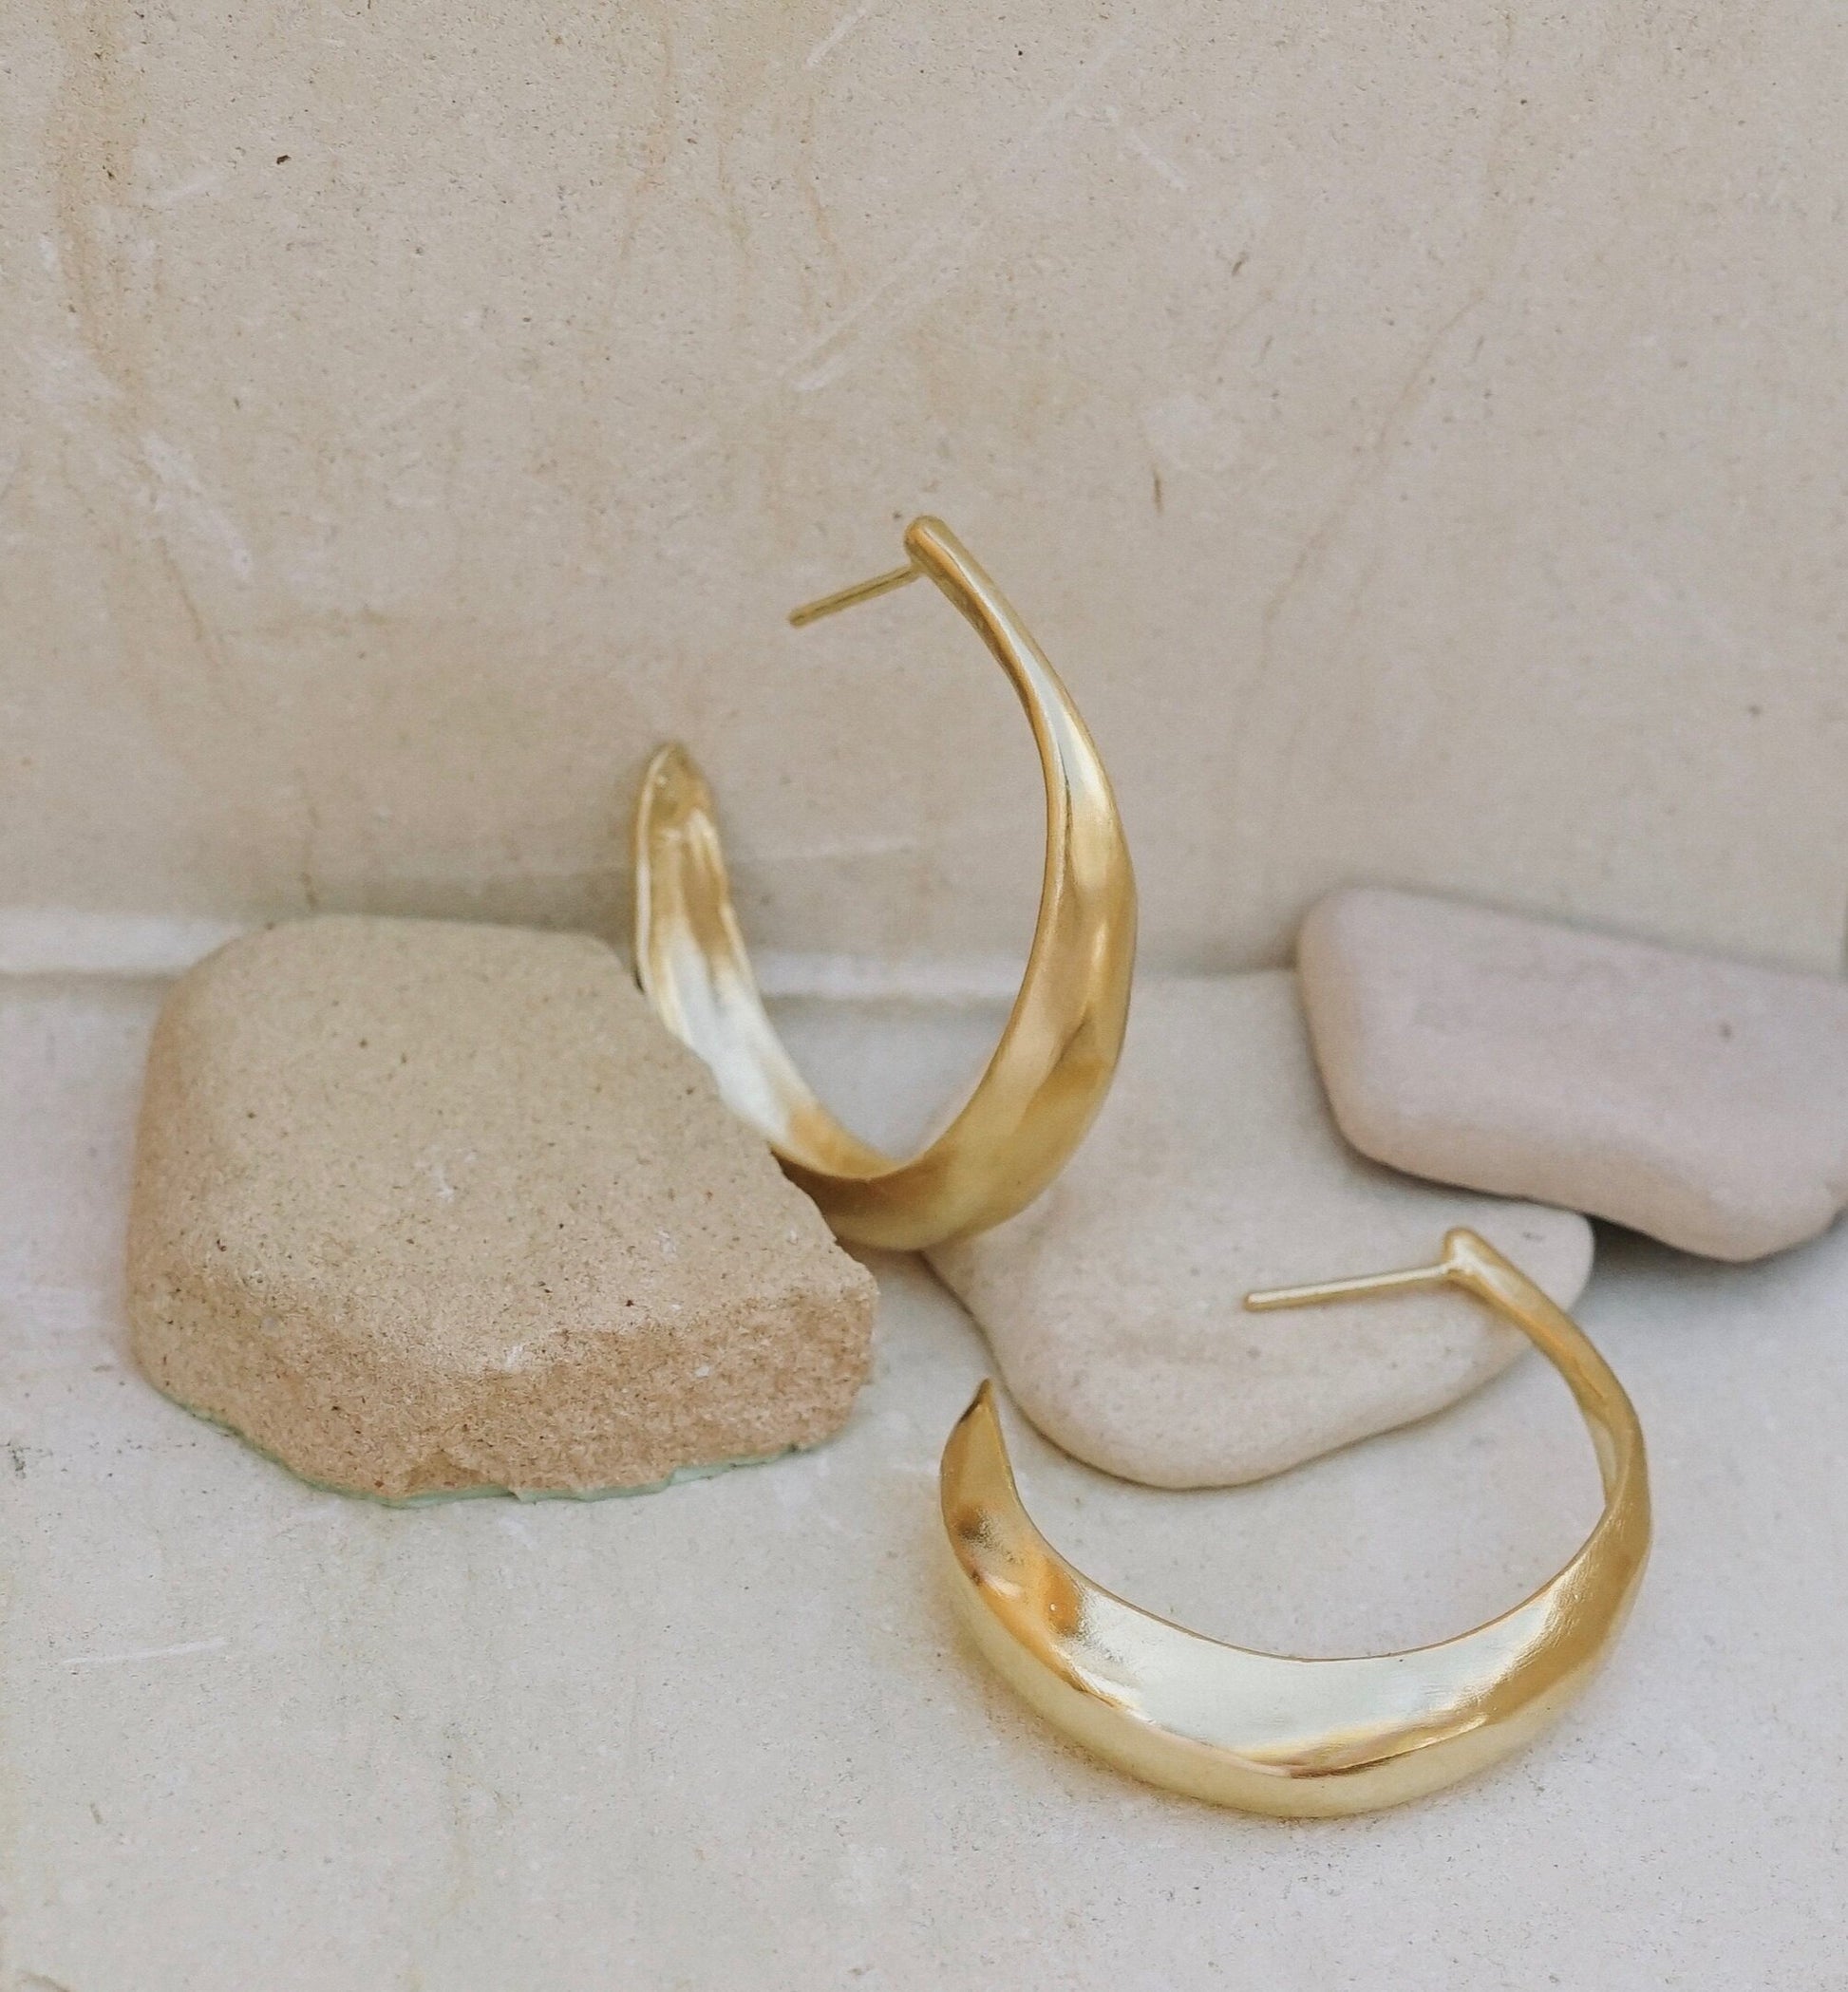 Textured organic simple light weight hoop earrings. This pair can be worn daily for a feminine, sculptural and elegant classic style. Earrings are made of recycled brass with sterling silver studs coated in a thick layer of high grade 14k gold. Handmade in the Santa Cruz Mountains.